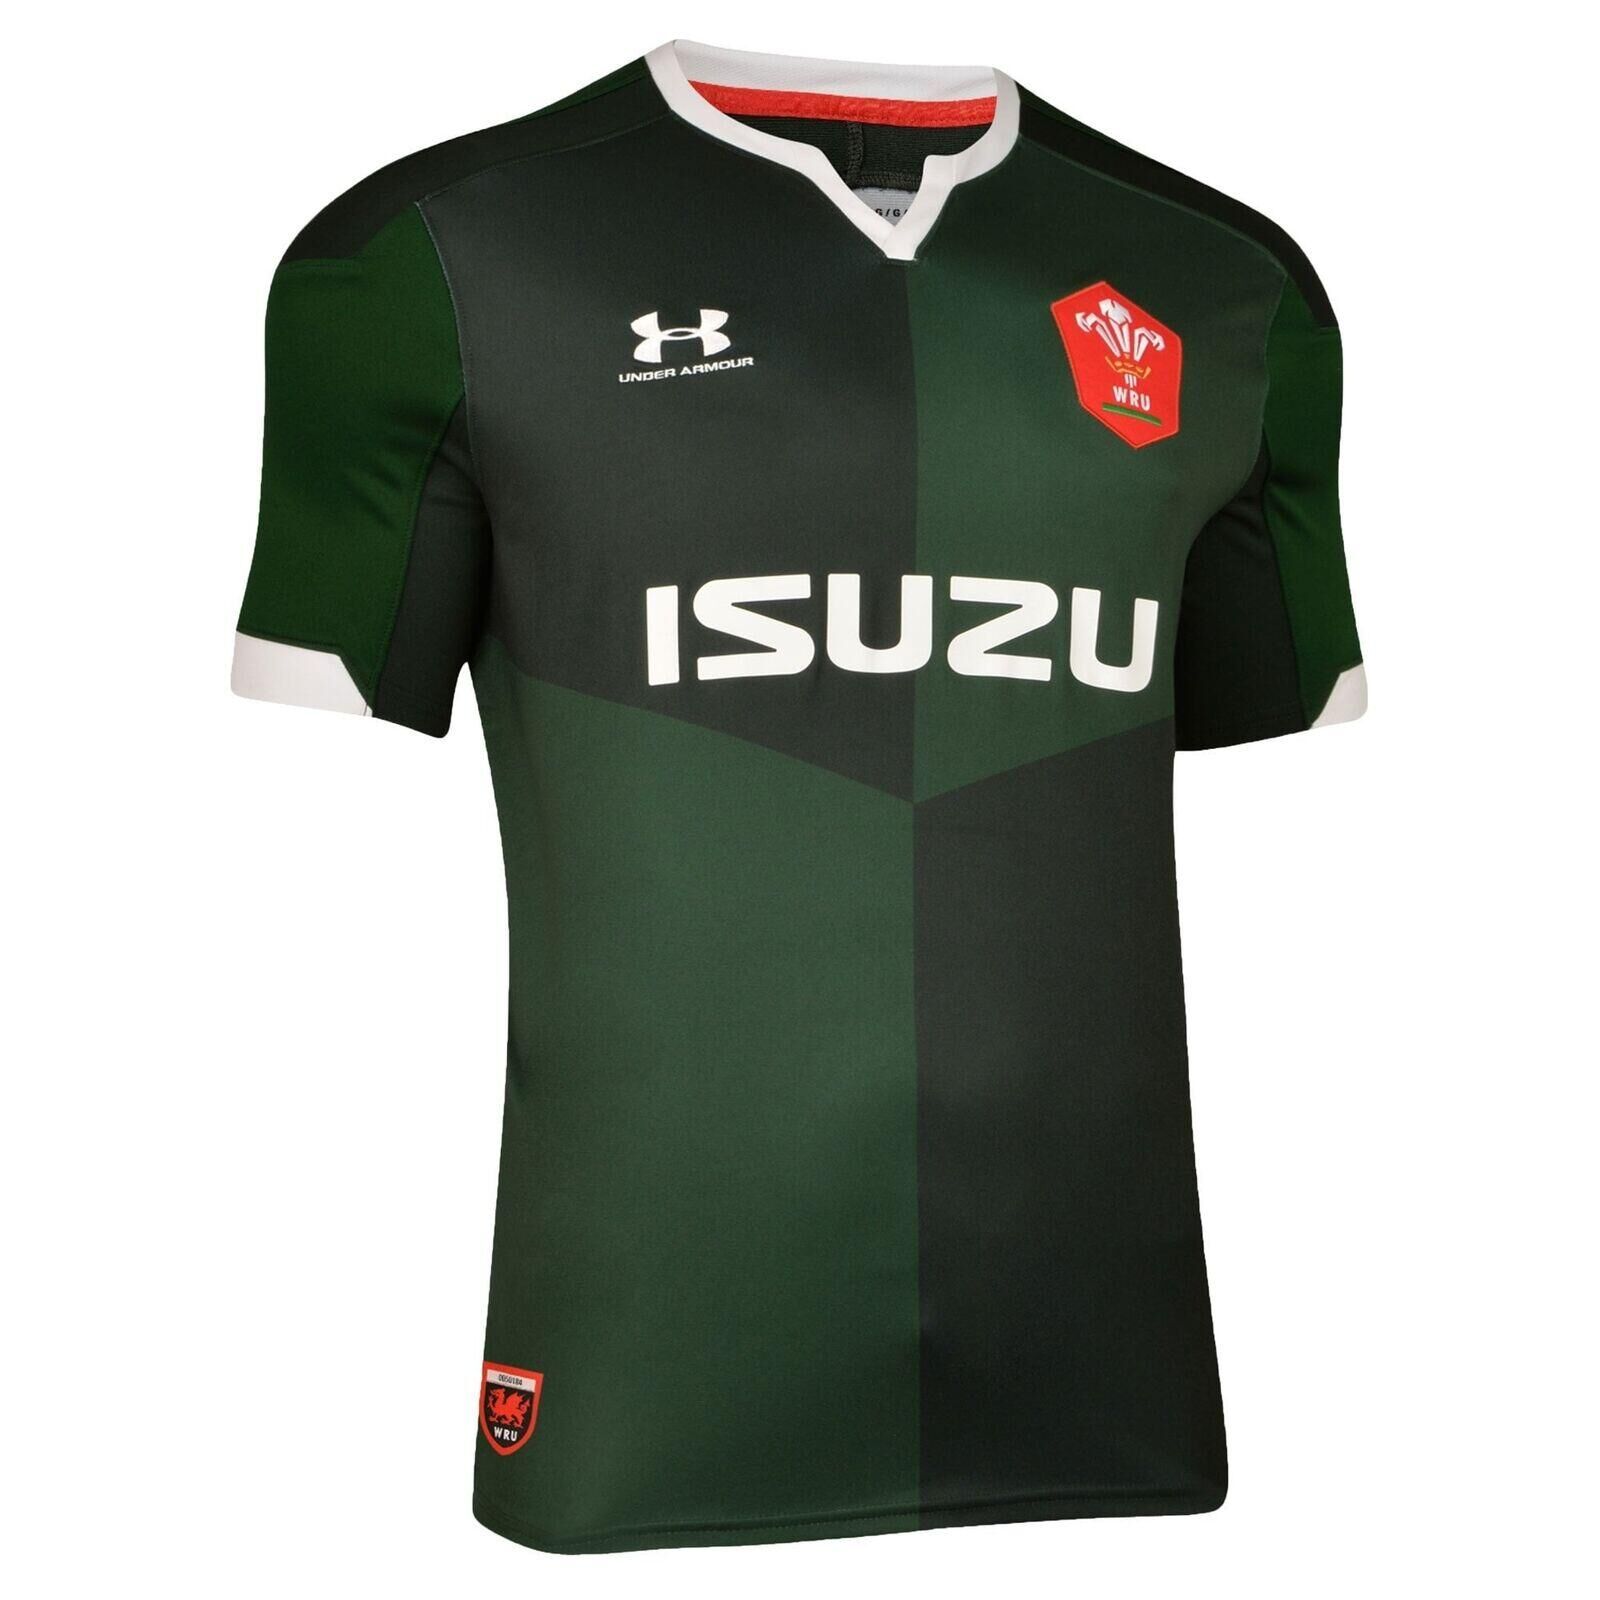 UNDER ARMOUR Under Armour Wales WRU Away Kids Rugby Shirt Green